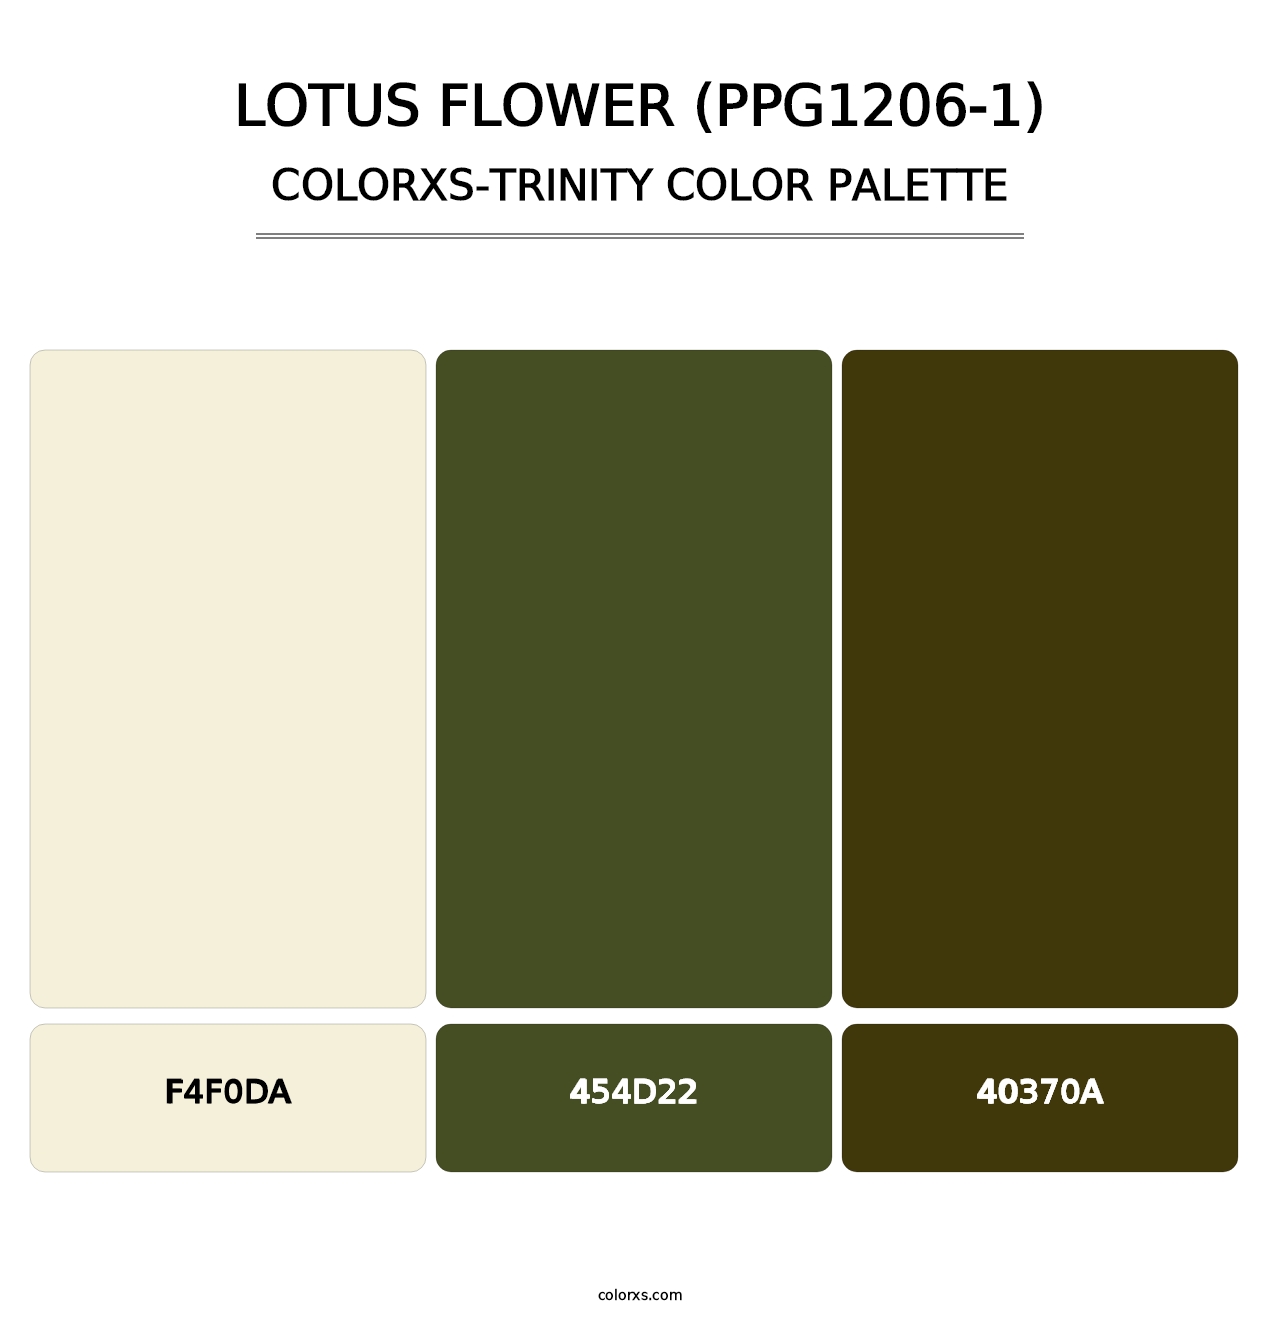 Lotus Flower (PPG1206-1) - Colorxs Trinity Palette